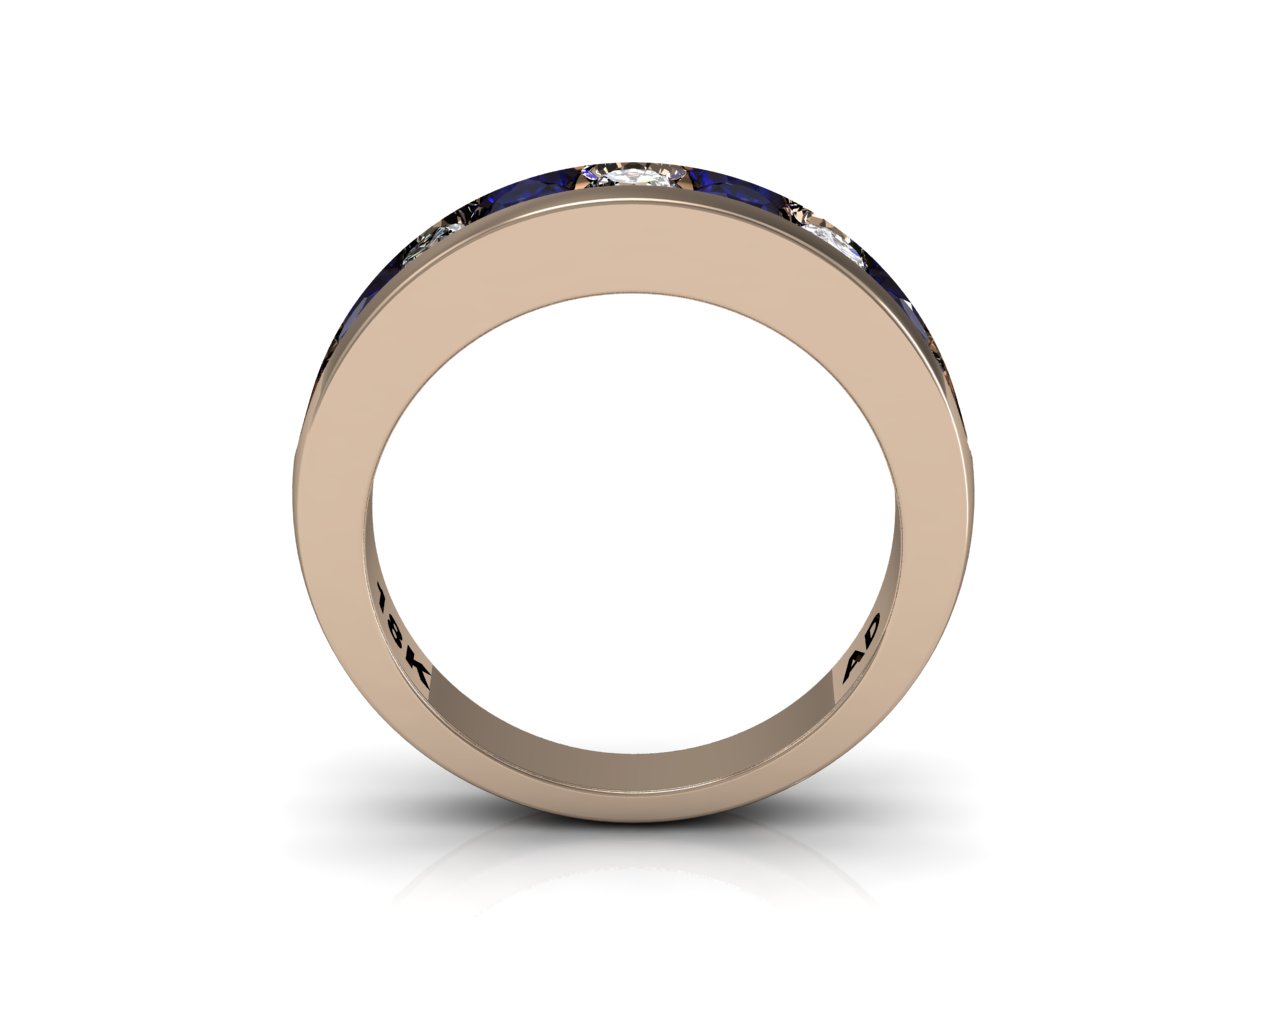 Wedding Bands Ladies Channel 9 Stone 1.0 TCW Diamonds and Blue Sapphire 6.1g 18kt Rose Gold South Bay Gold - Torrance